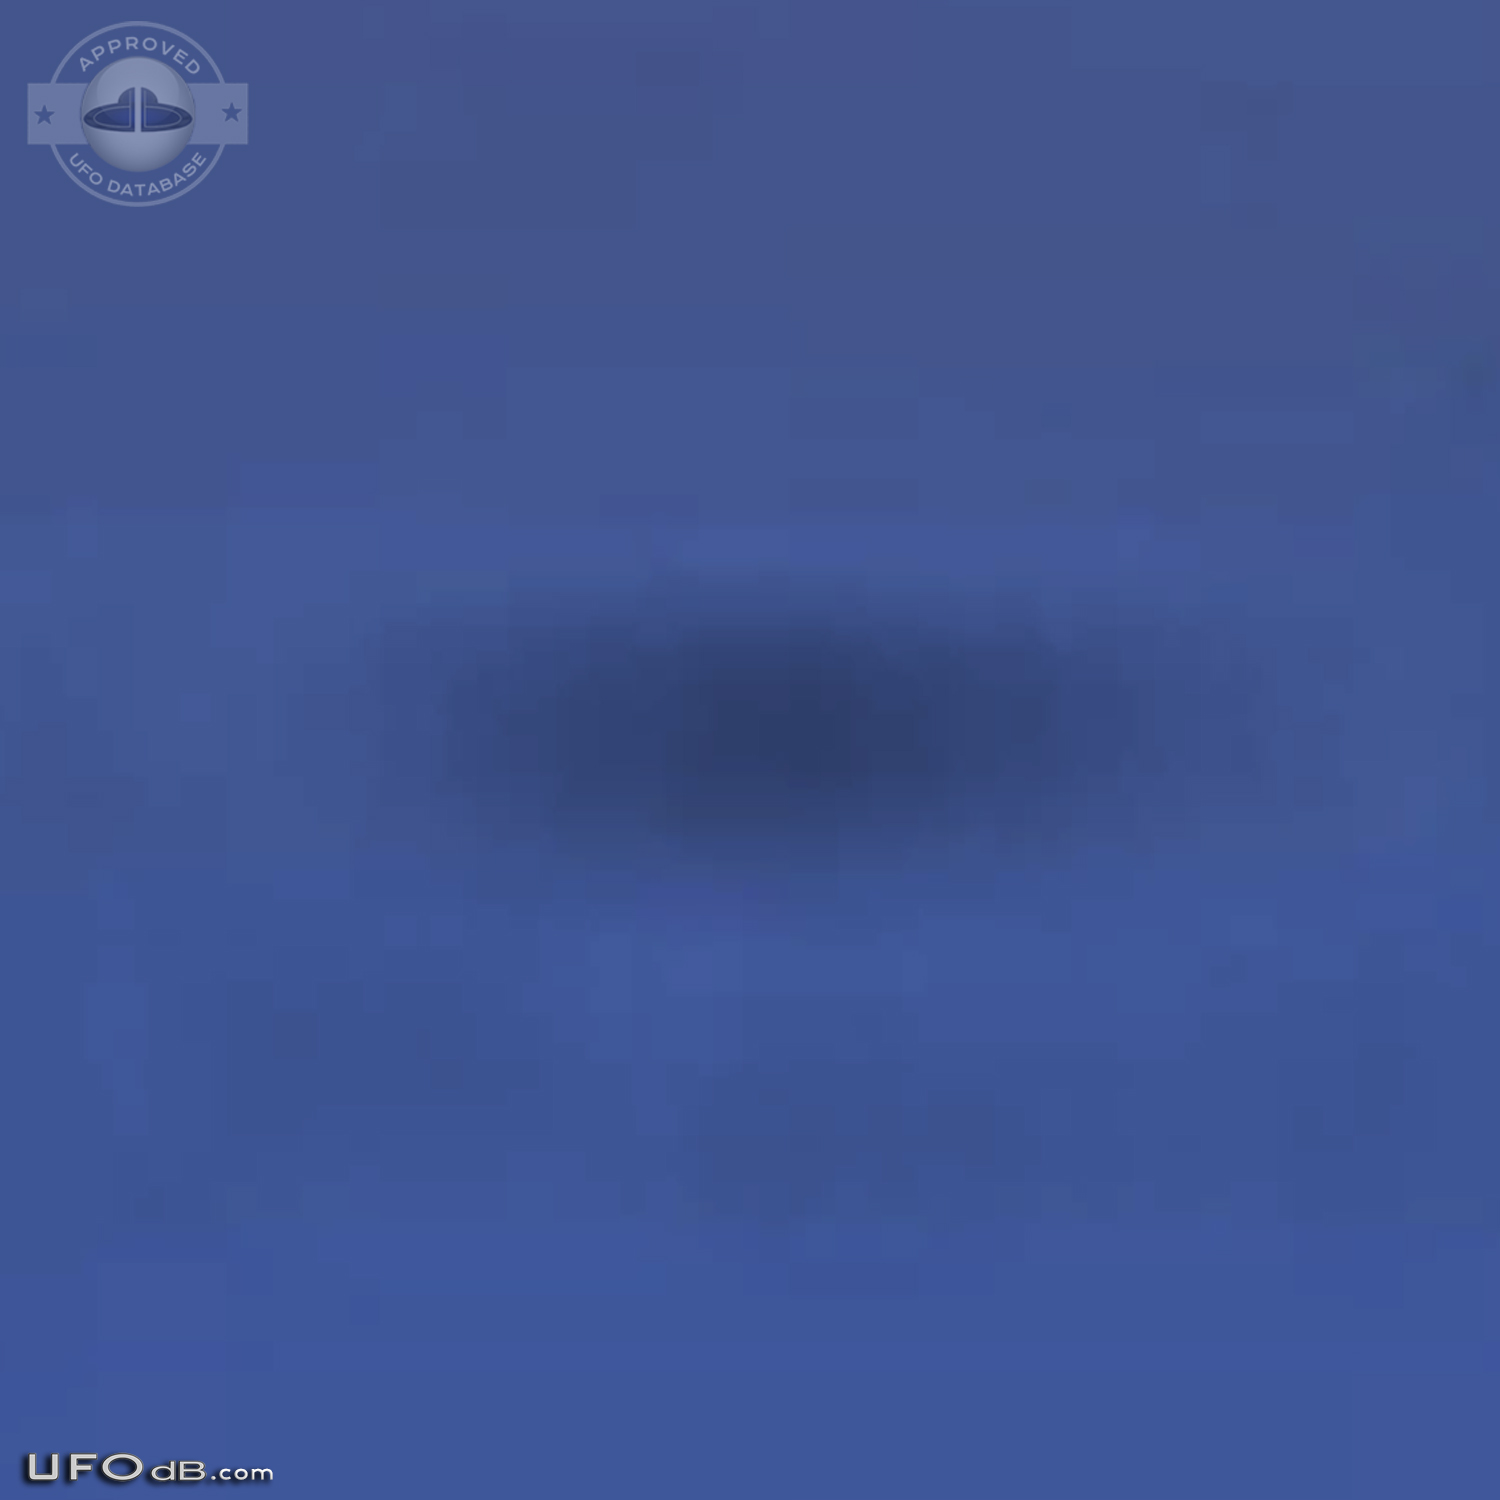 Large 70 meters wide UFO caught on picture - Cordoba, Argentina - 2009 UFO Picture #369-6